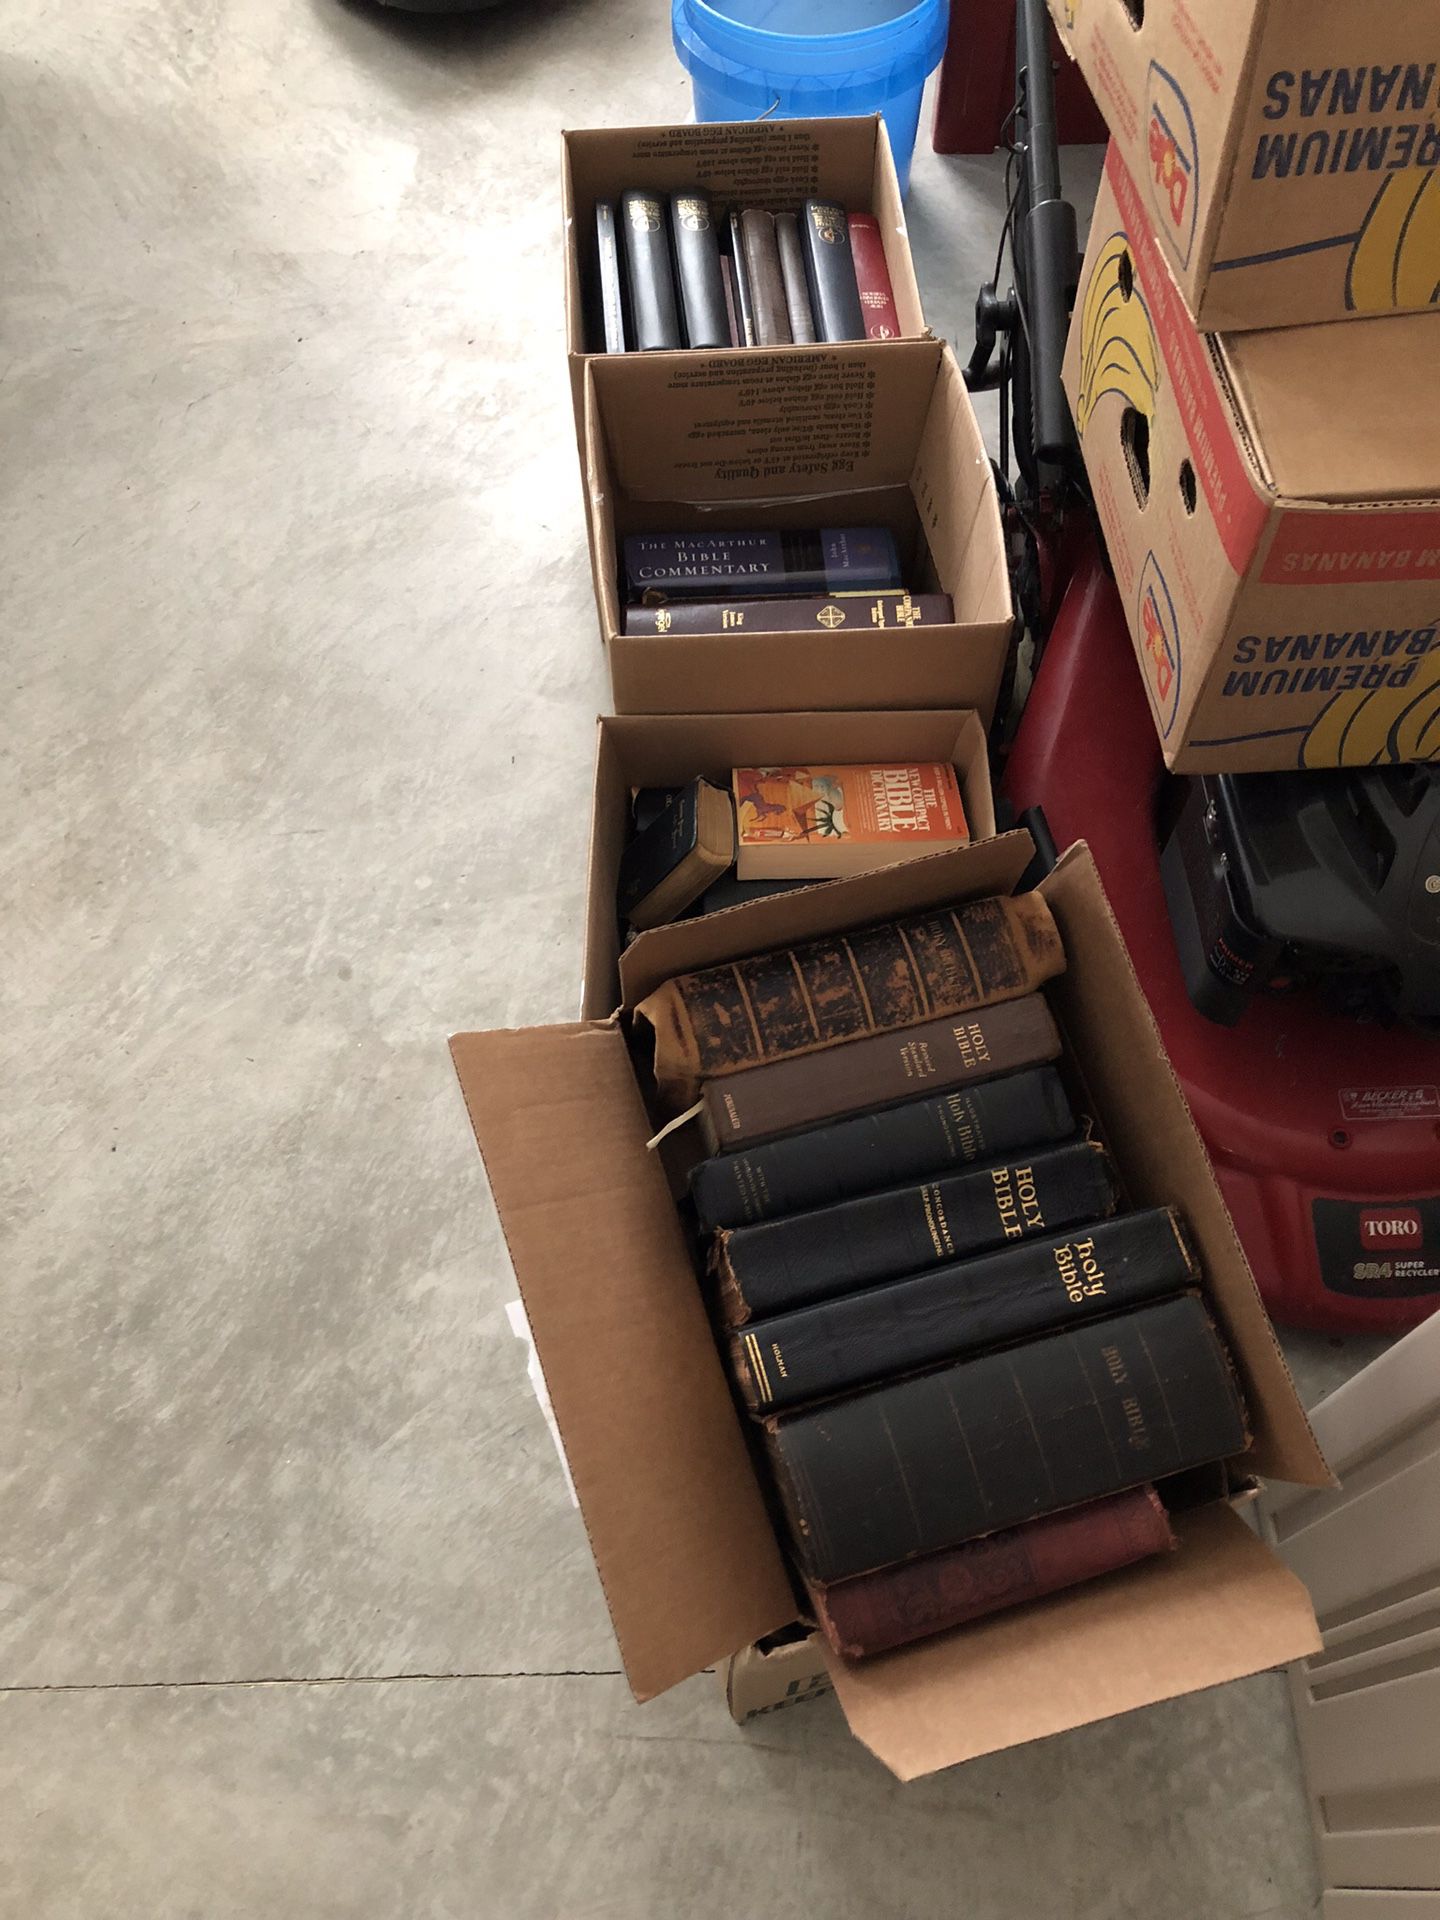 Old Bibles, reference books and Methodist Hymnals